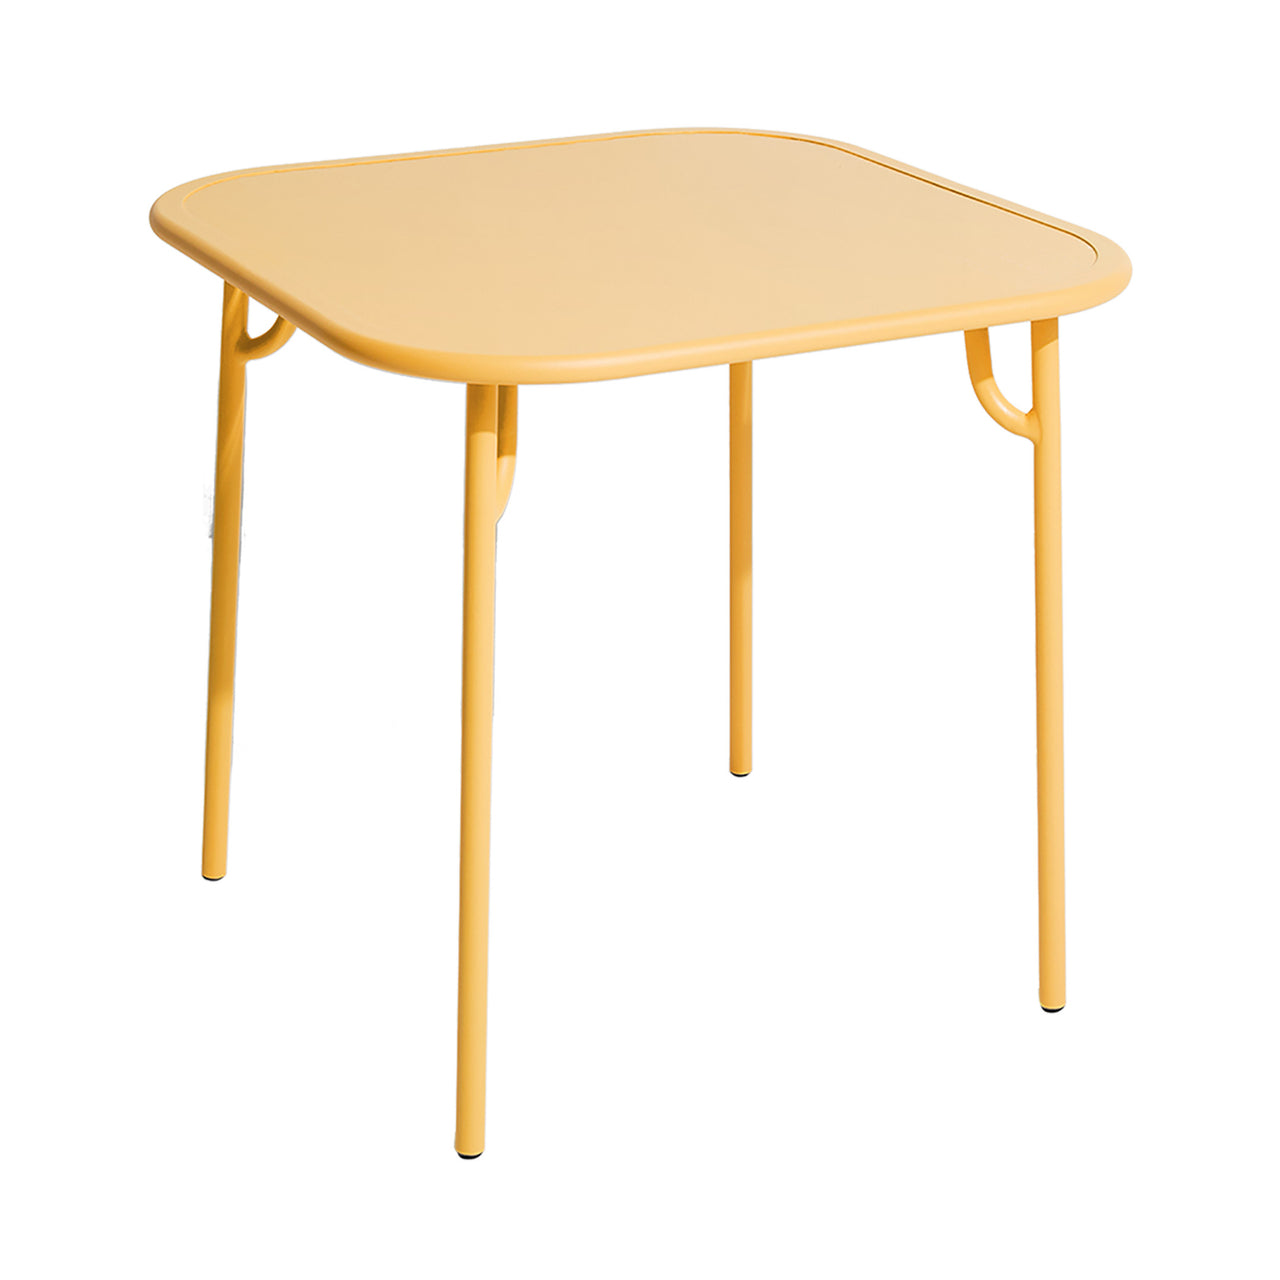 Week-End Square Dining Table: Saffron